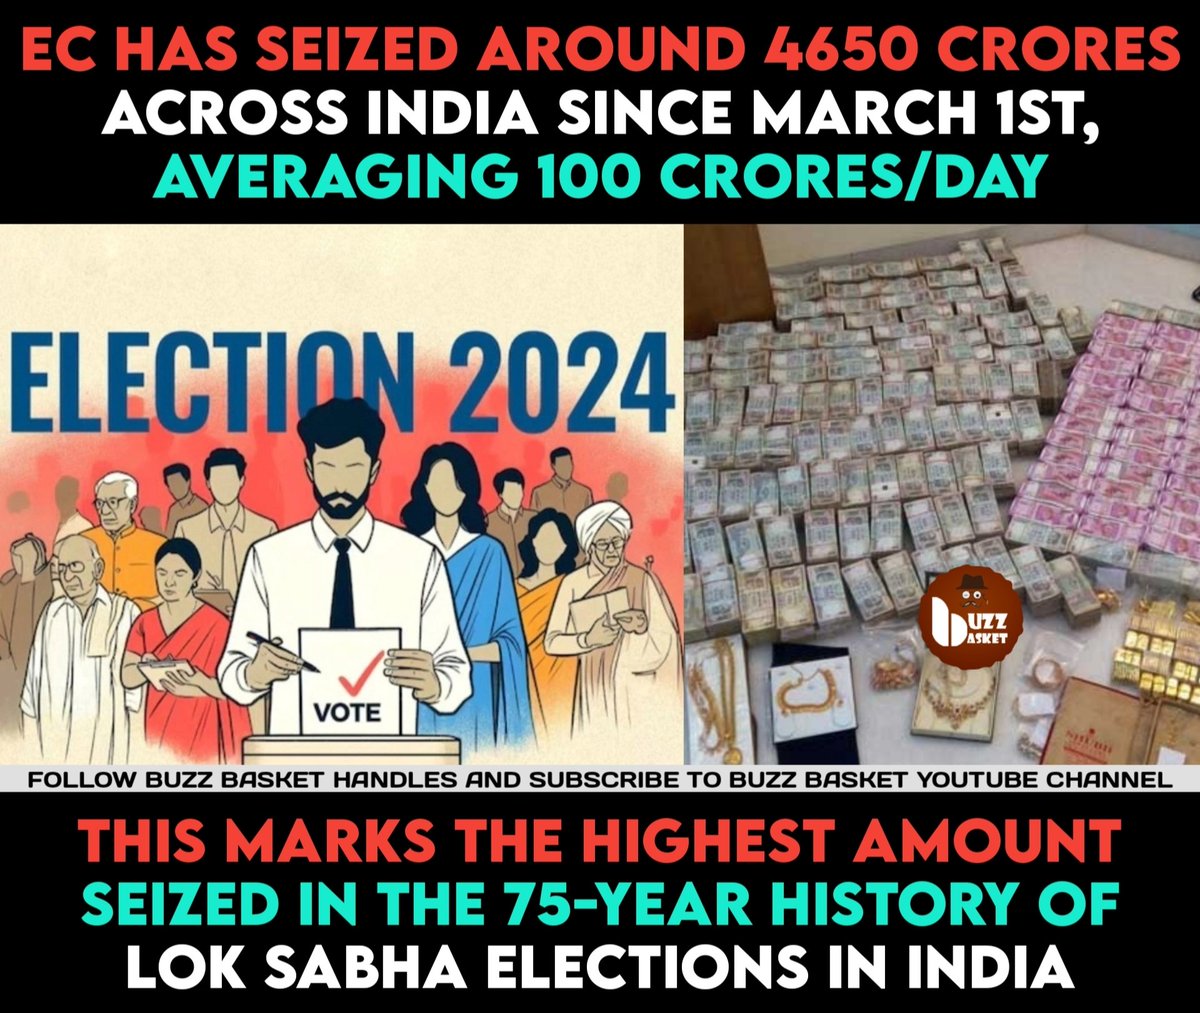 #ElectionCommission has seized 4650Cr which is highest in #LokSabhaElections till date. #LokSabhaElection2024 #LokSabha2024 #LokSabhaElection